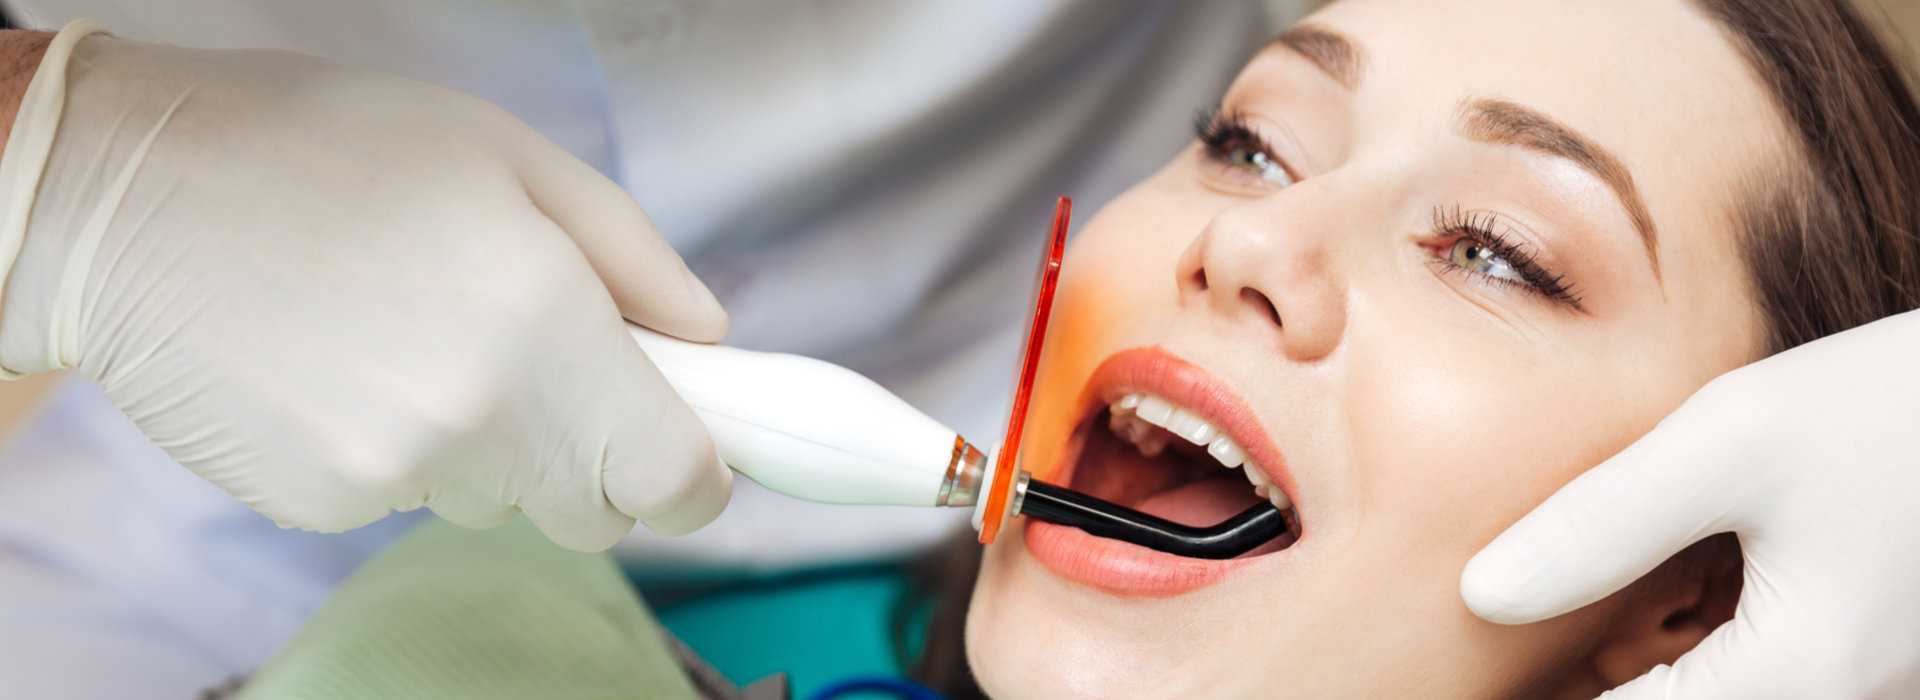 A woman is having laser dentistry.